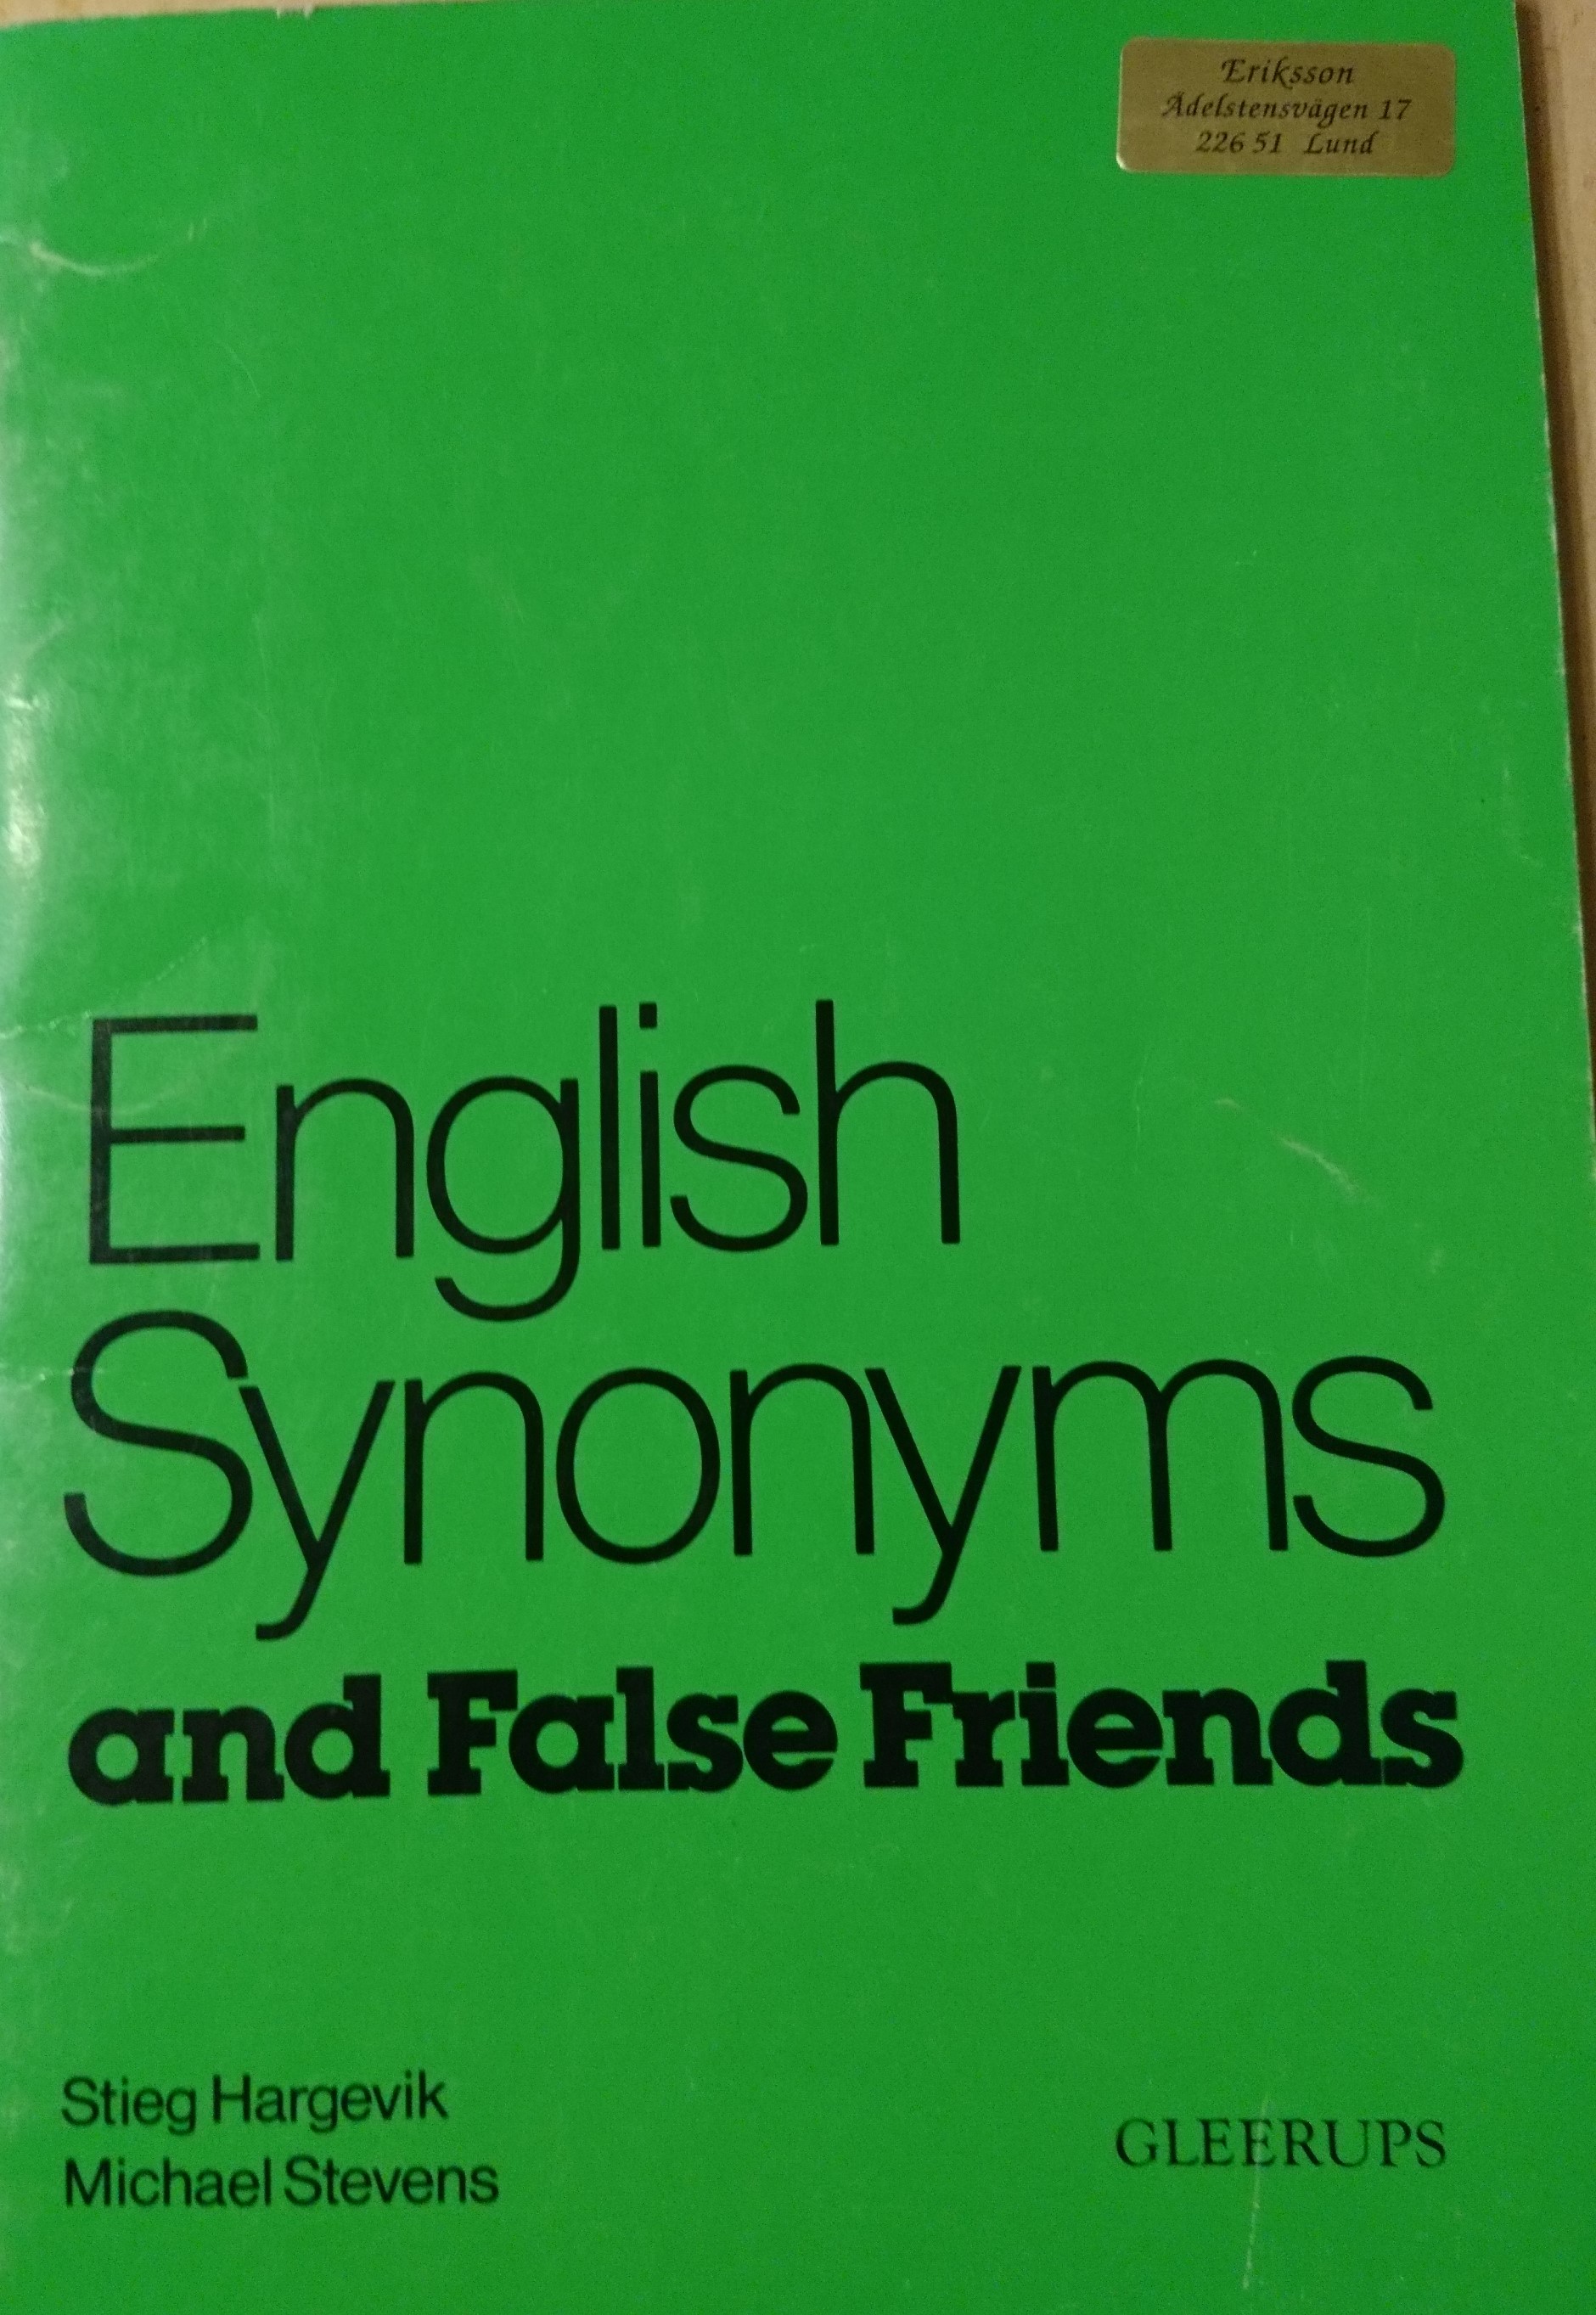 English Synonyms and False Friends; Stieg Hargevik; 1978